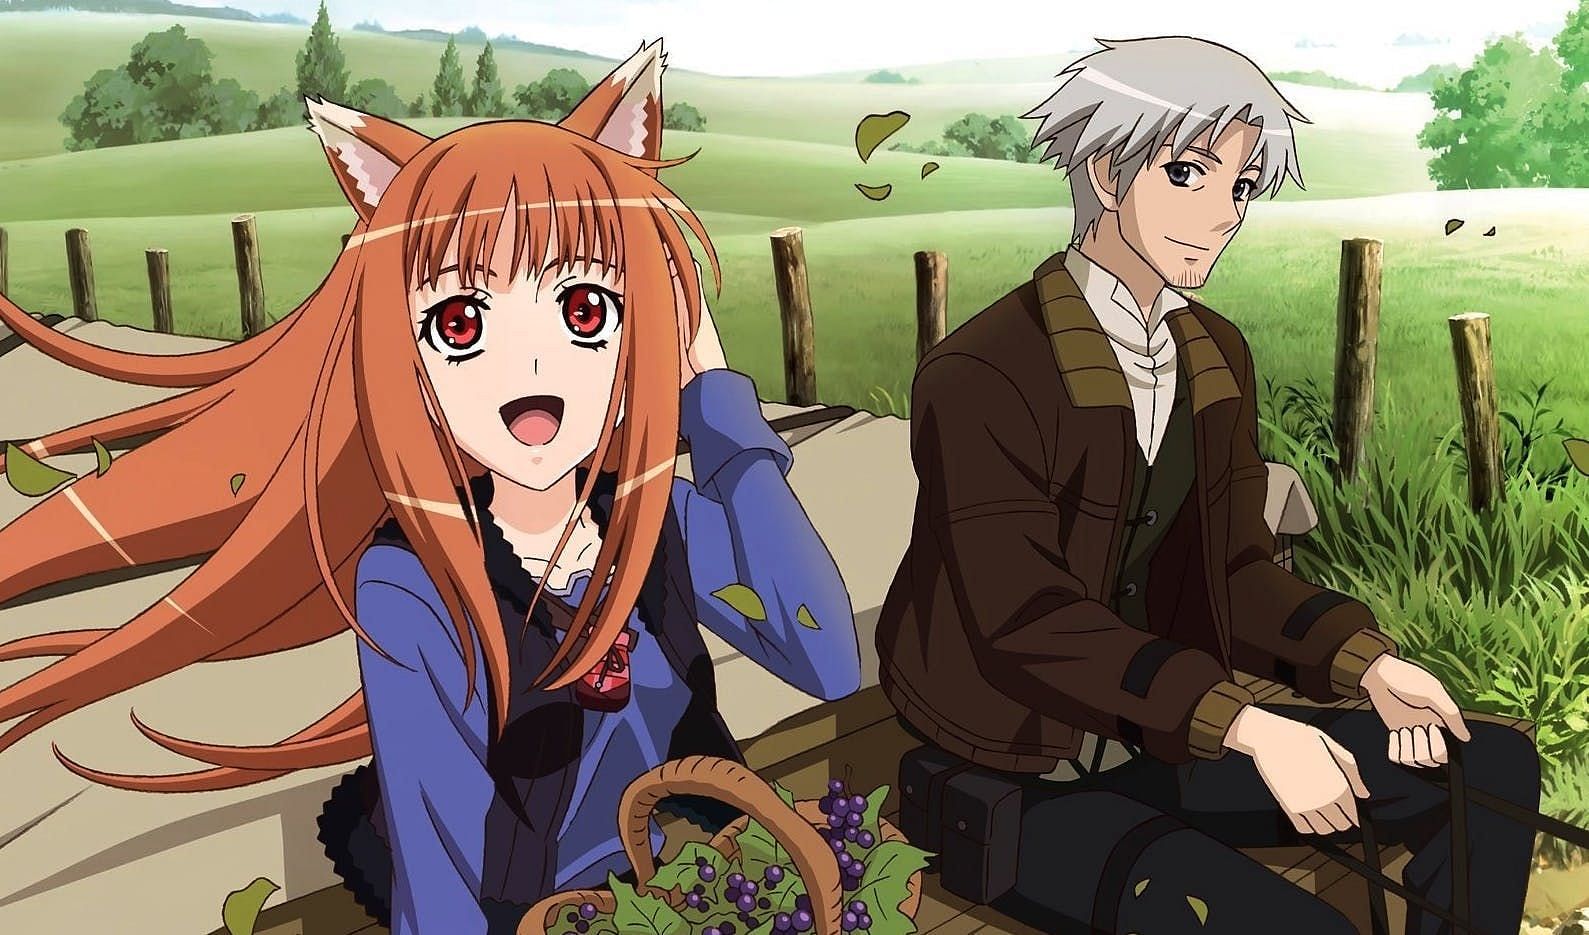 Spice and Wolf (Image via Imagin)